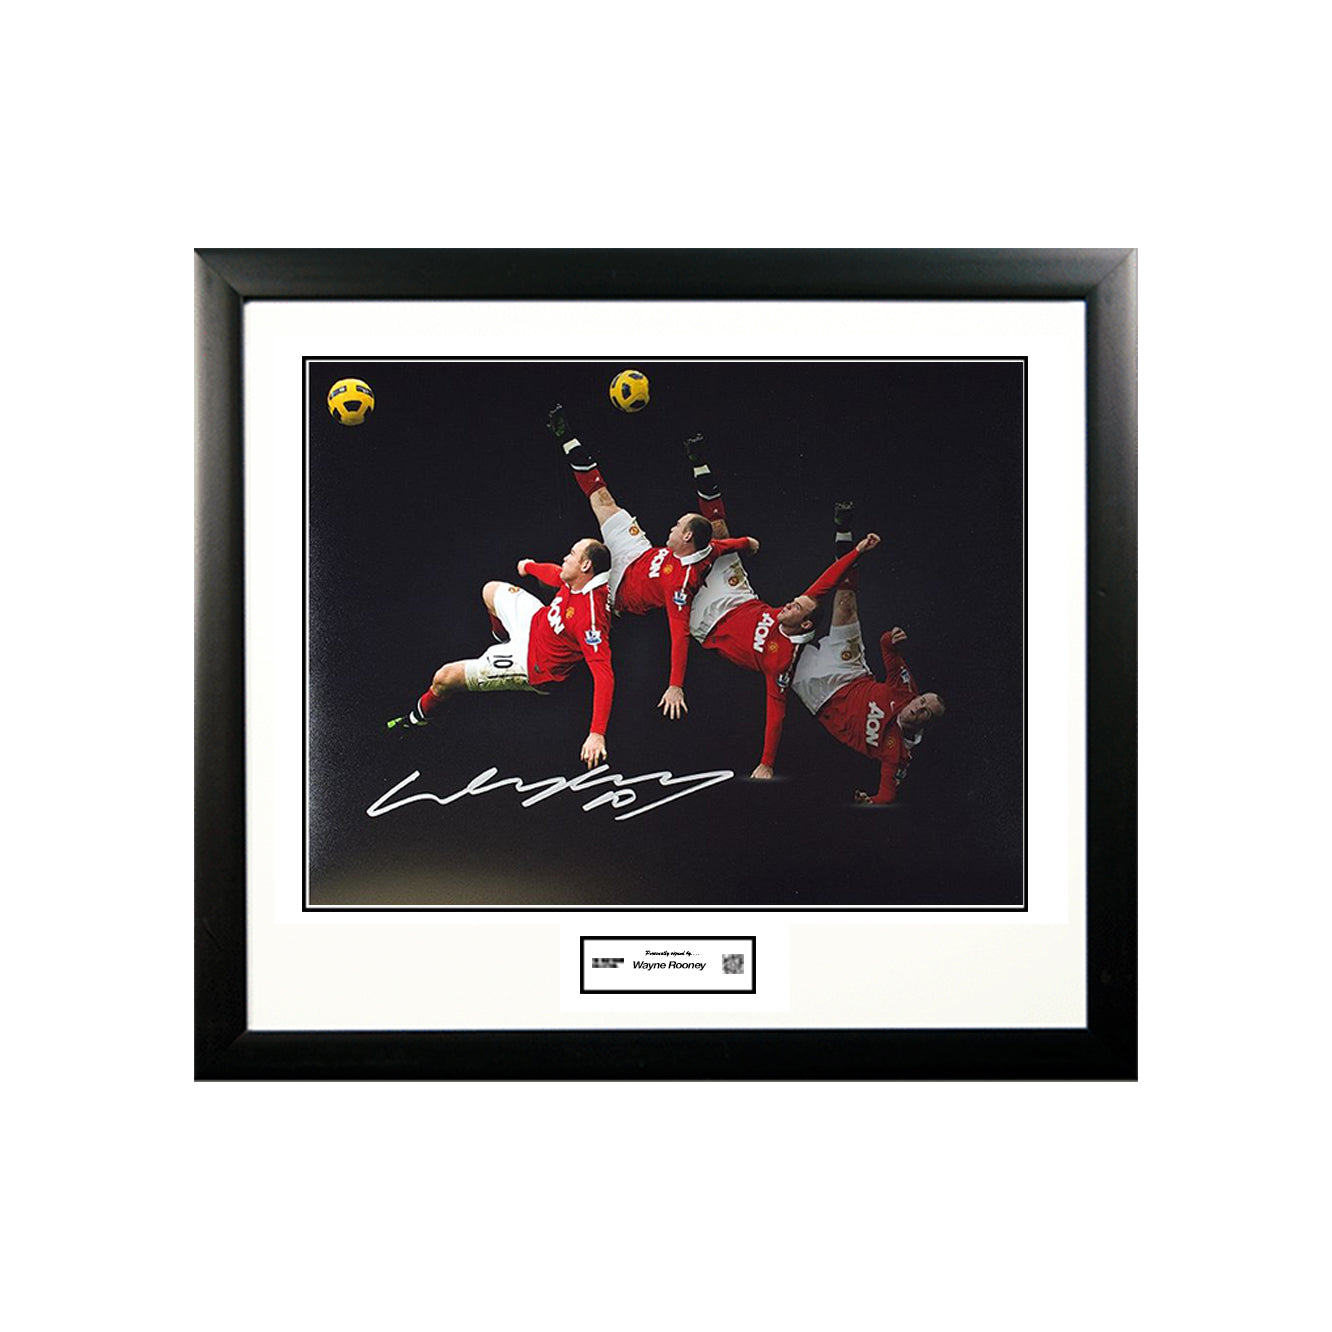 Wayne Rooney Signed Manchester United Overhead Kick Photograph Special Edition - The Bootroom Collection